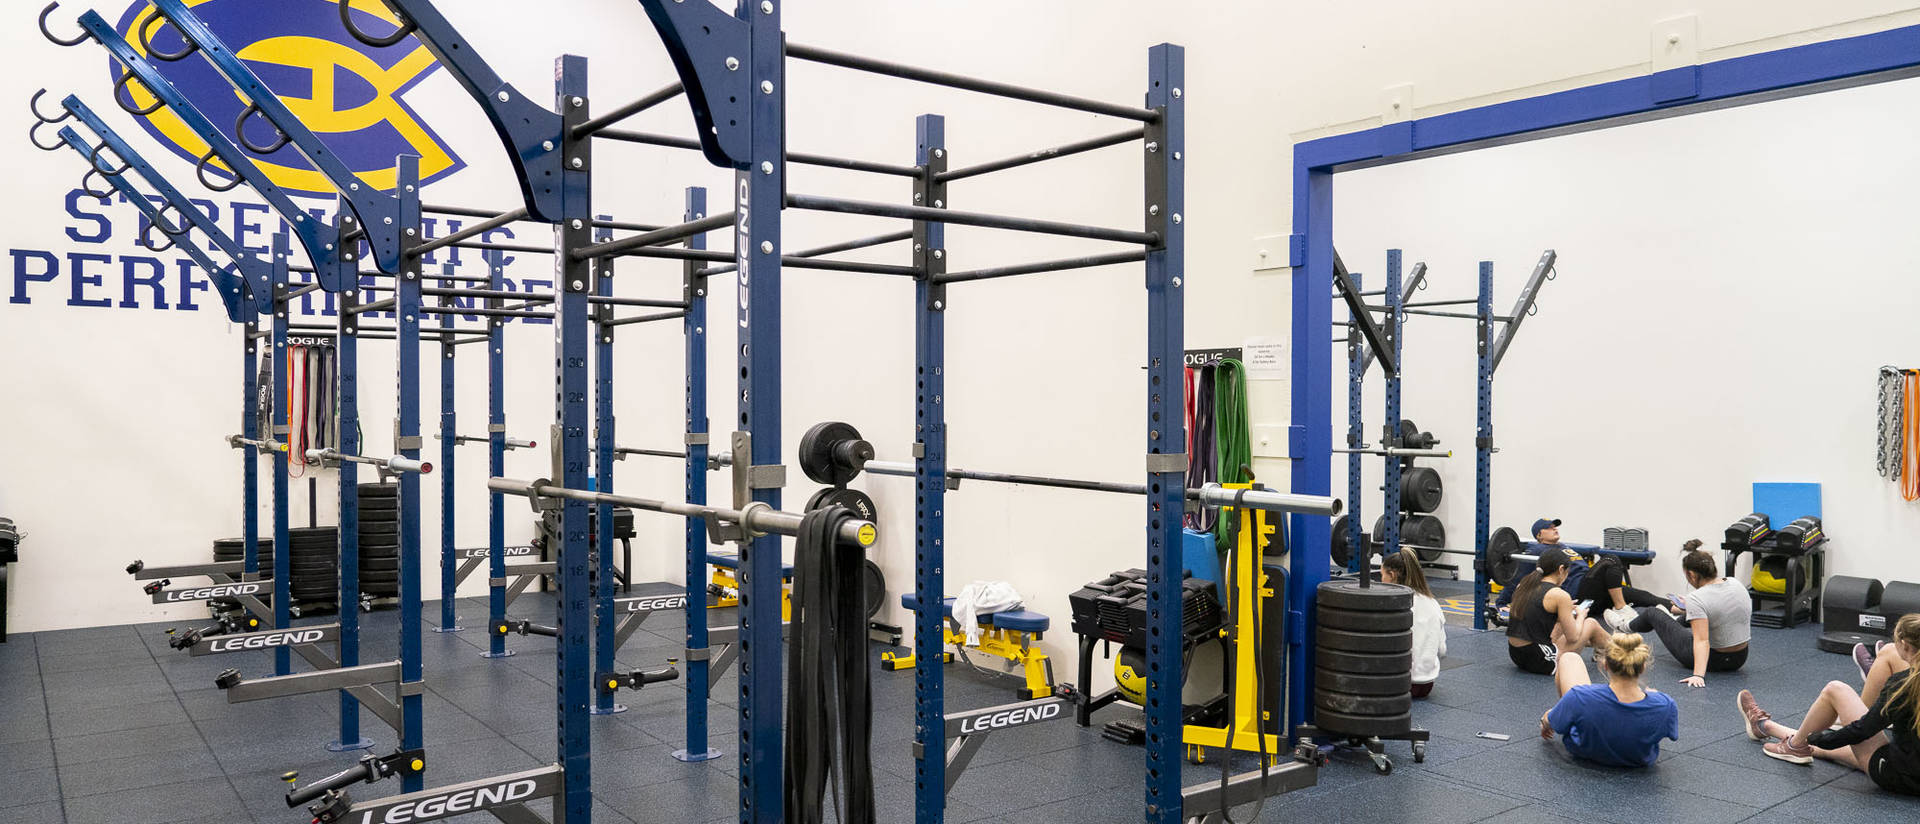 Workout and weight room area in McPhee